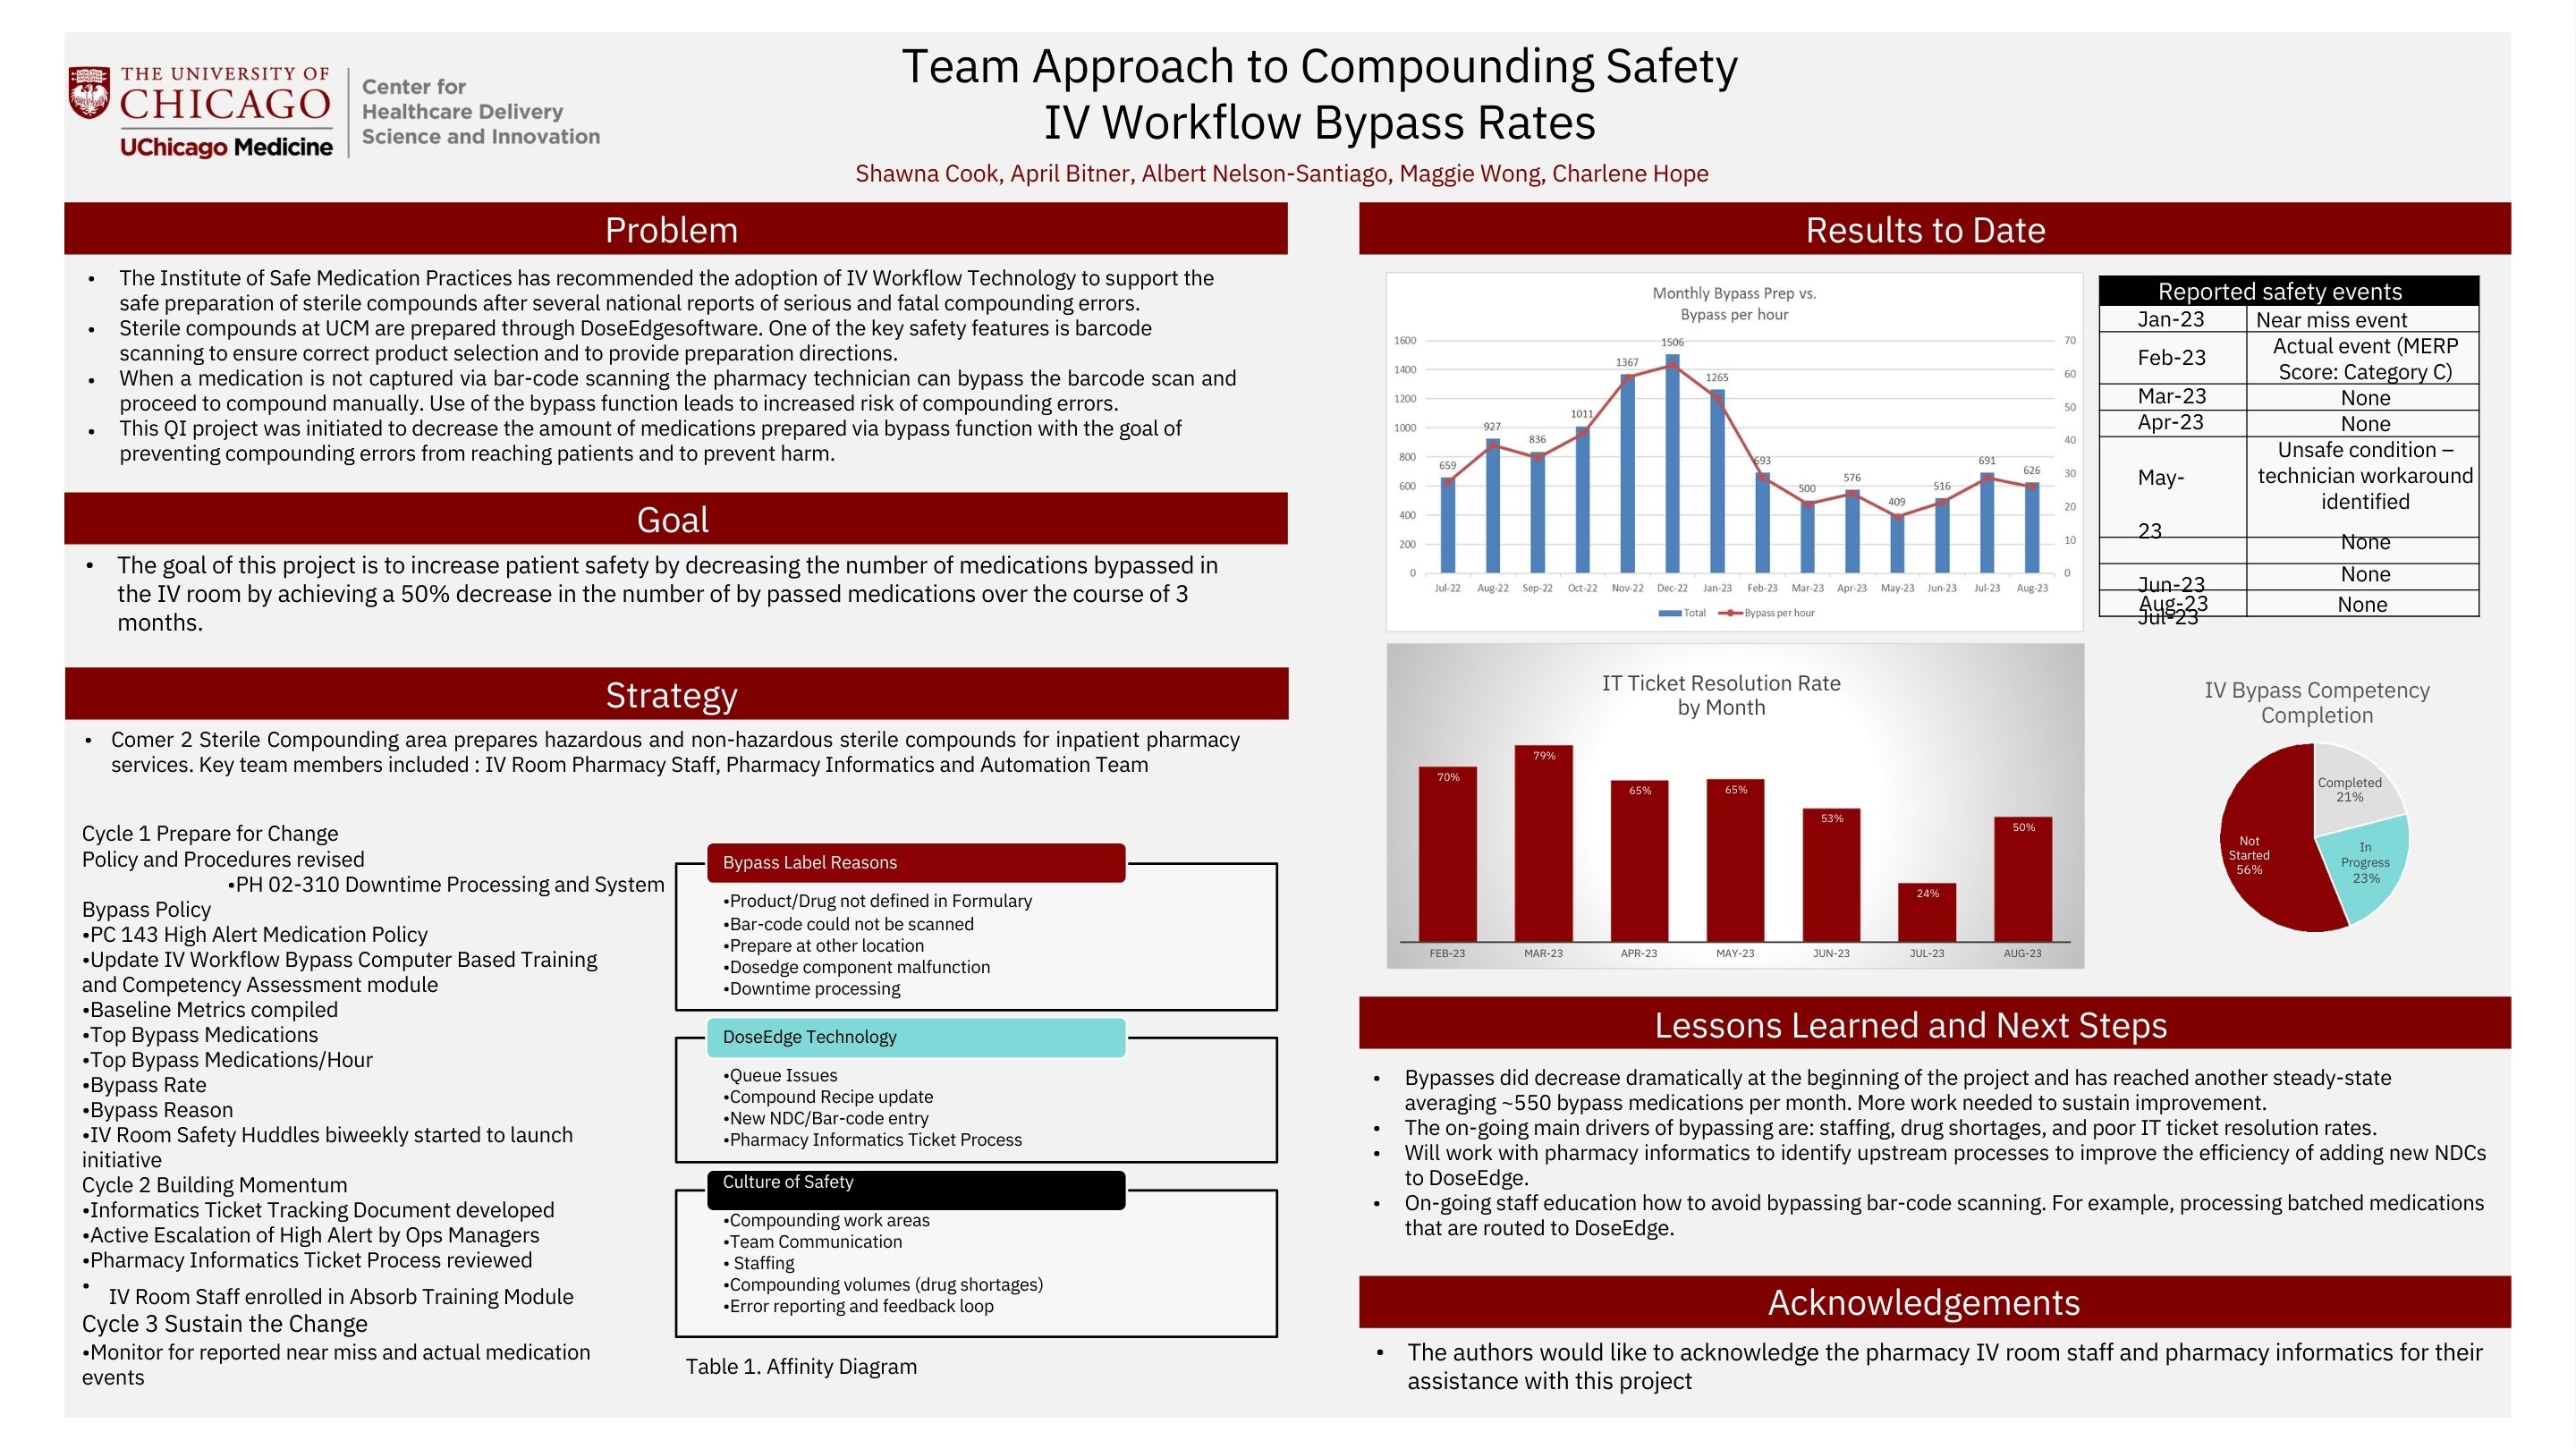 COOK_Team Approach to Compounding Safety IV Workflow Bypass Rates